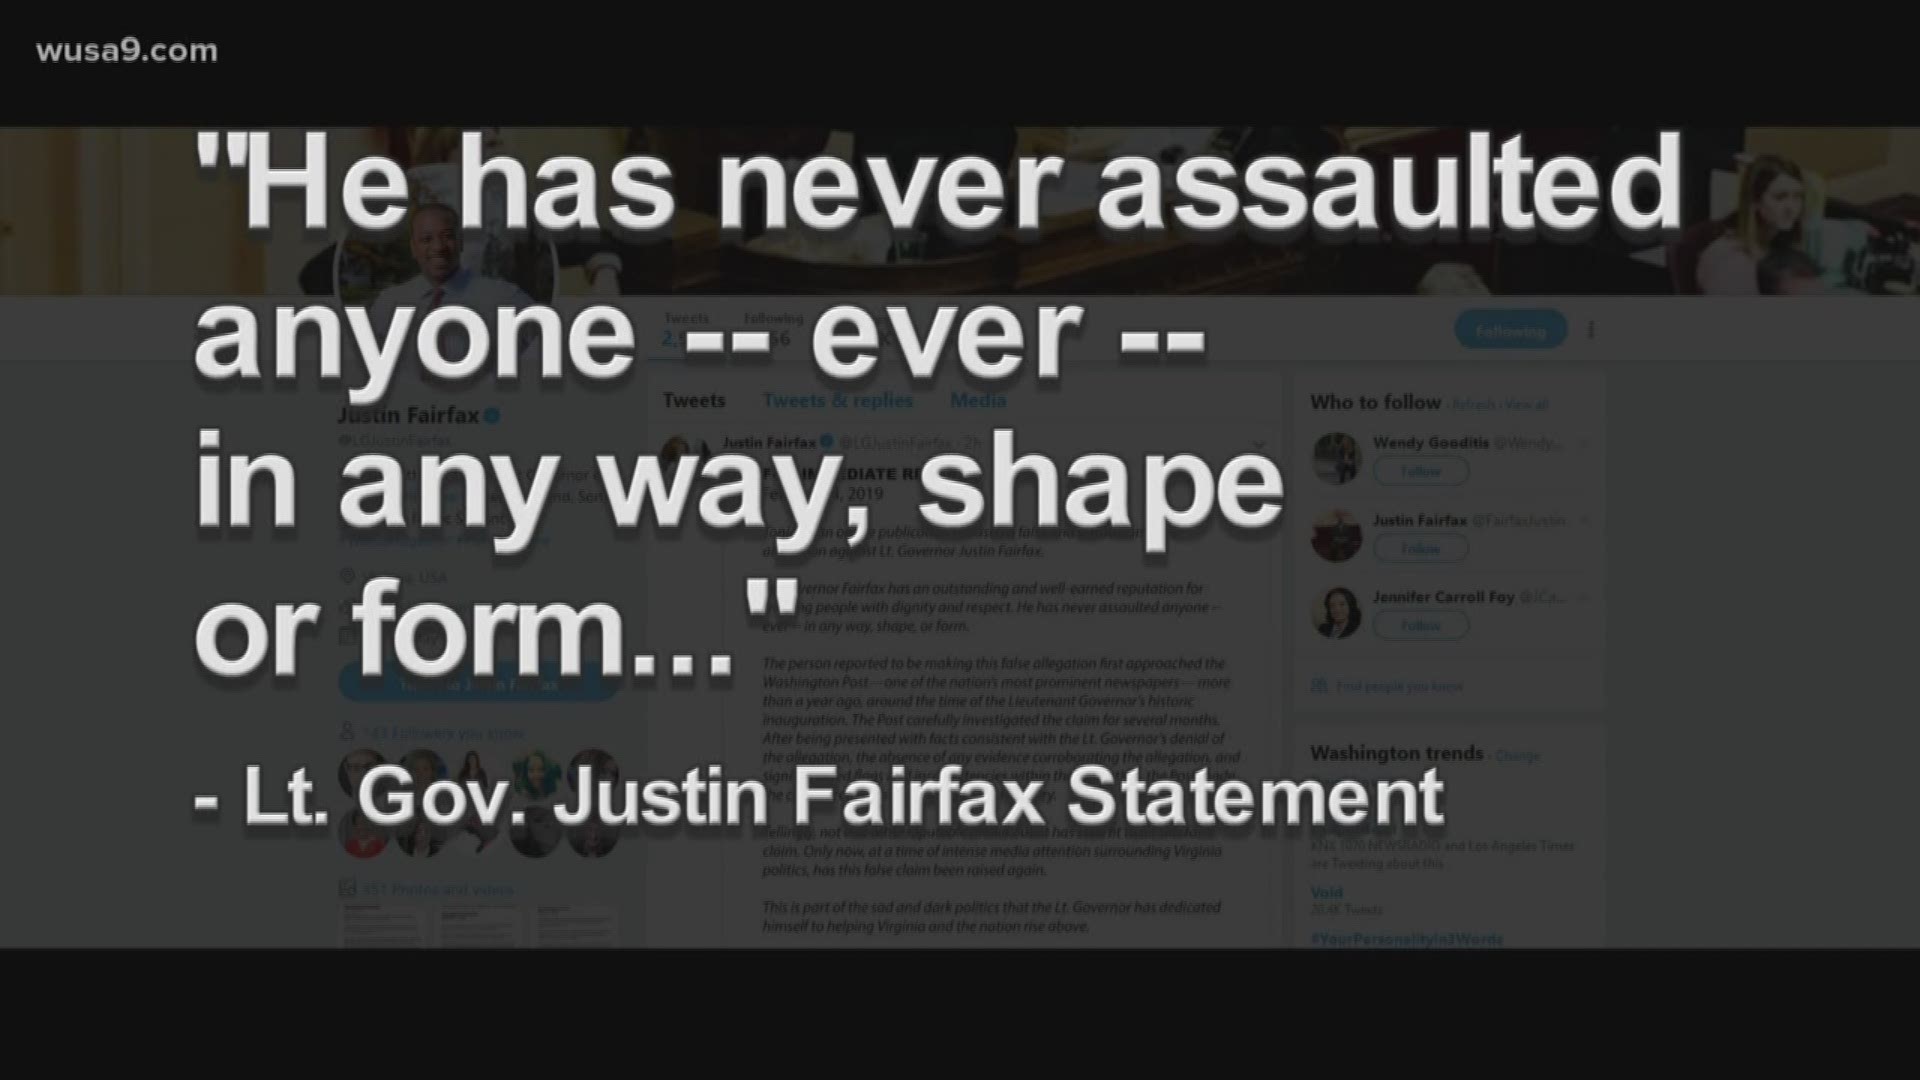 The allegation involves an unsubstantiated claim of sexual assault against Fairfax during the Democratic National Convention in 2004.